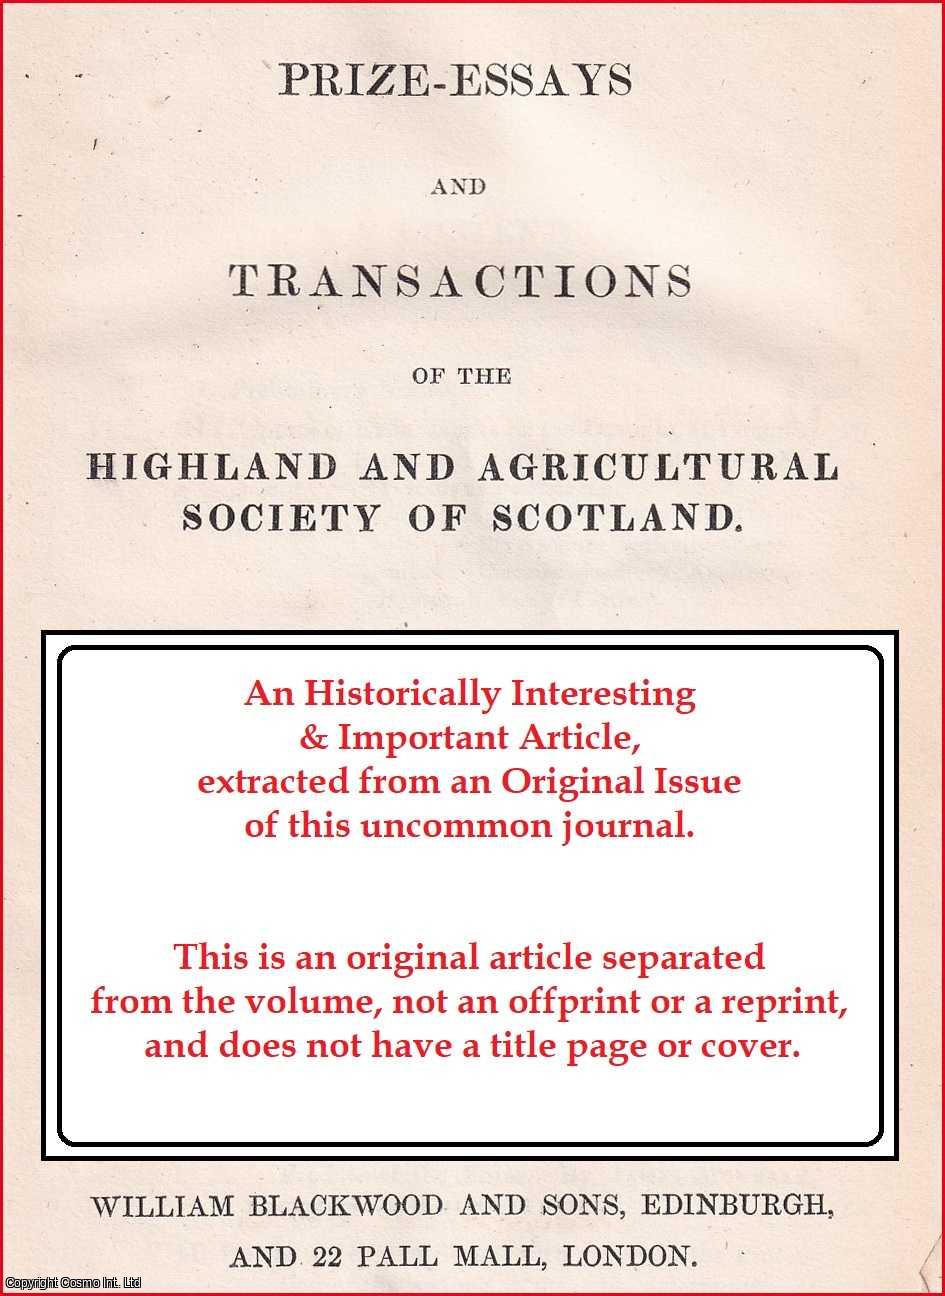 Mr. W. Hogg, Shepherd, Stobo, Peeblesshire. - Mossy Soil : observations made in Ettrick Forest, Annandale, & Tweeddale. An uncommon original article from the Prize Essays and Transactions of the Highland Society of Scotland, 1829.